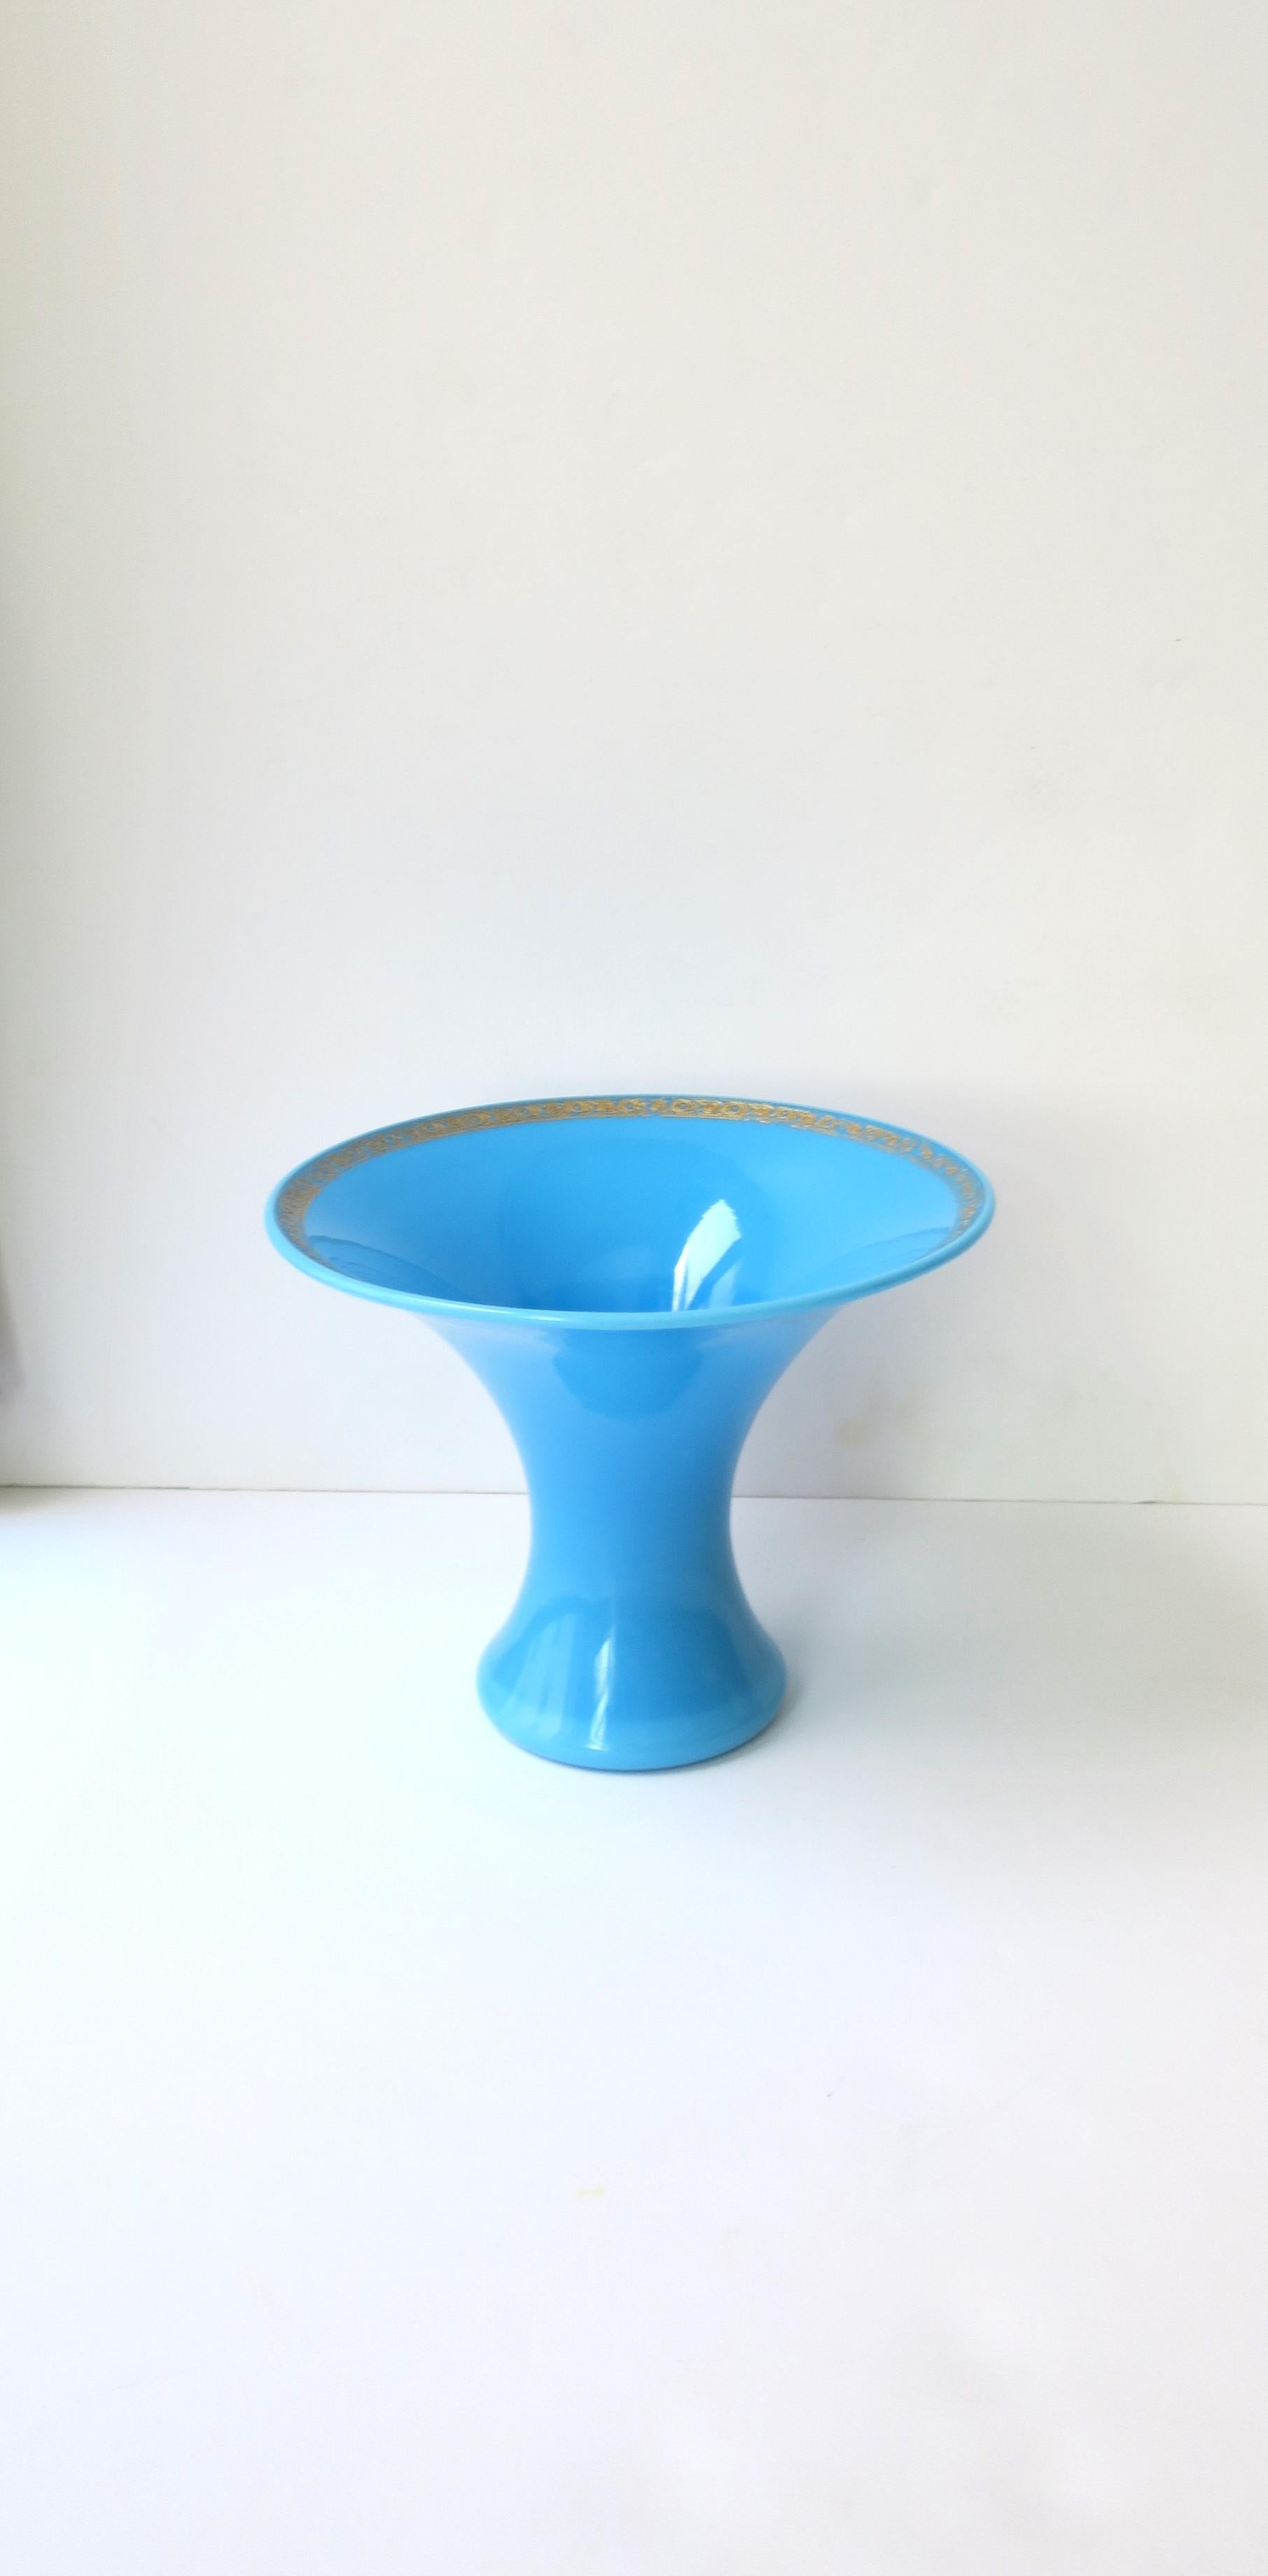 A beautiful Italian azure blue opaline glass vase with gold detail around lip, circa mid-20th century, 1960s, Italy. Beautiful as a standalone piece or with flowers. Vase has a nice top diameter to support bouquet, and a gold detail around edge.